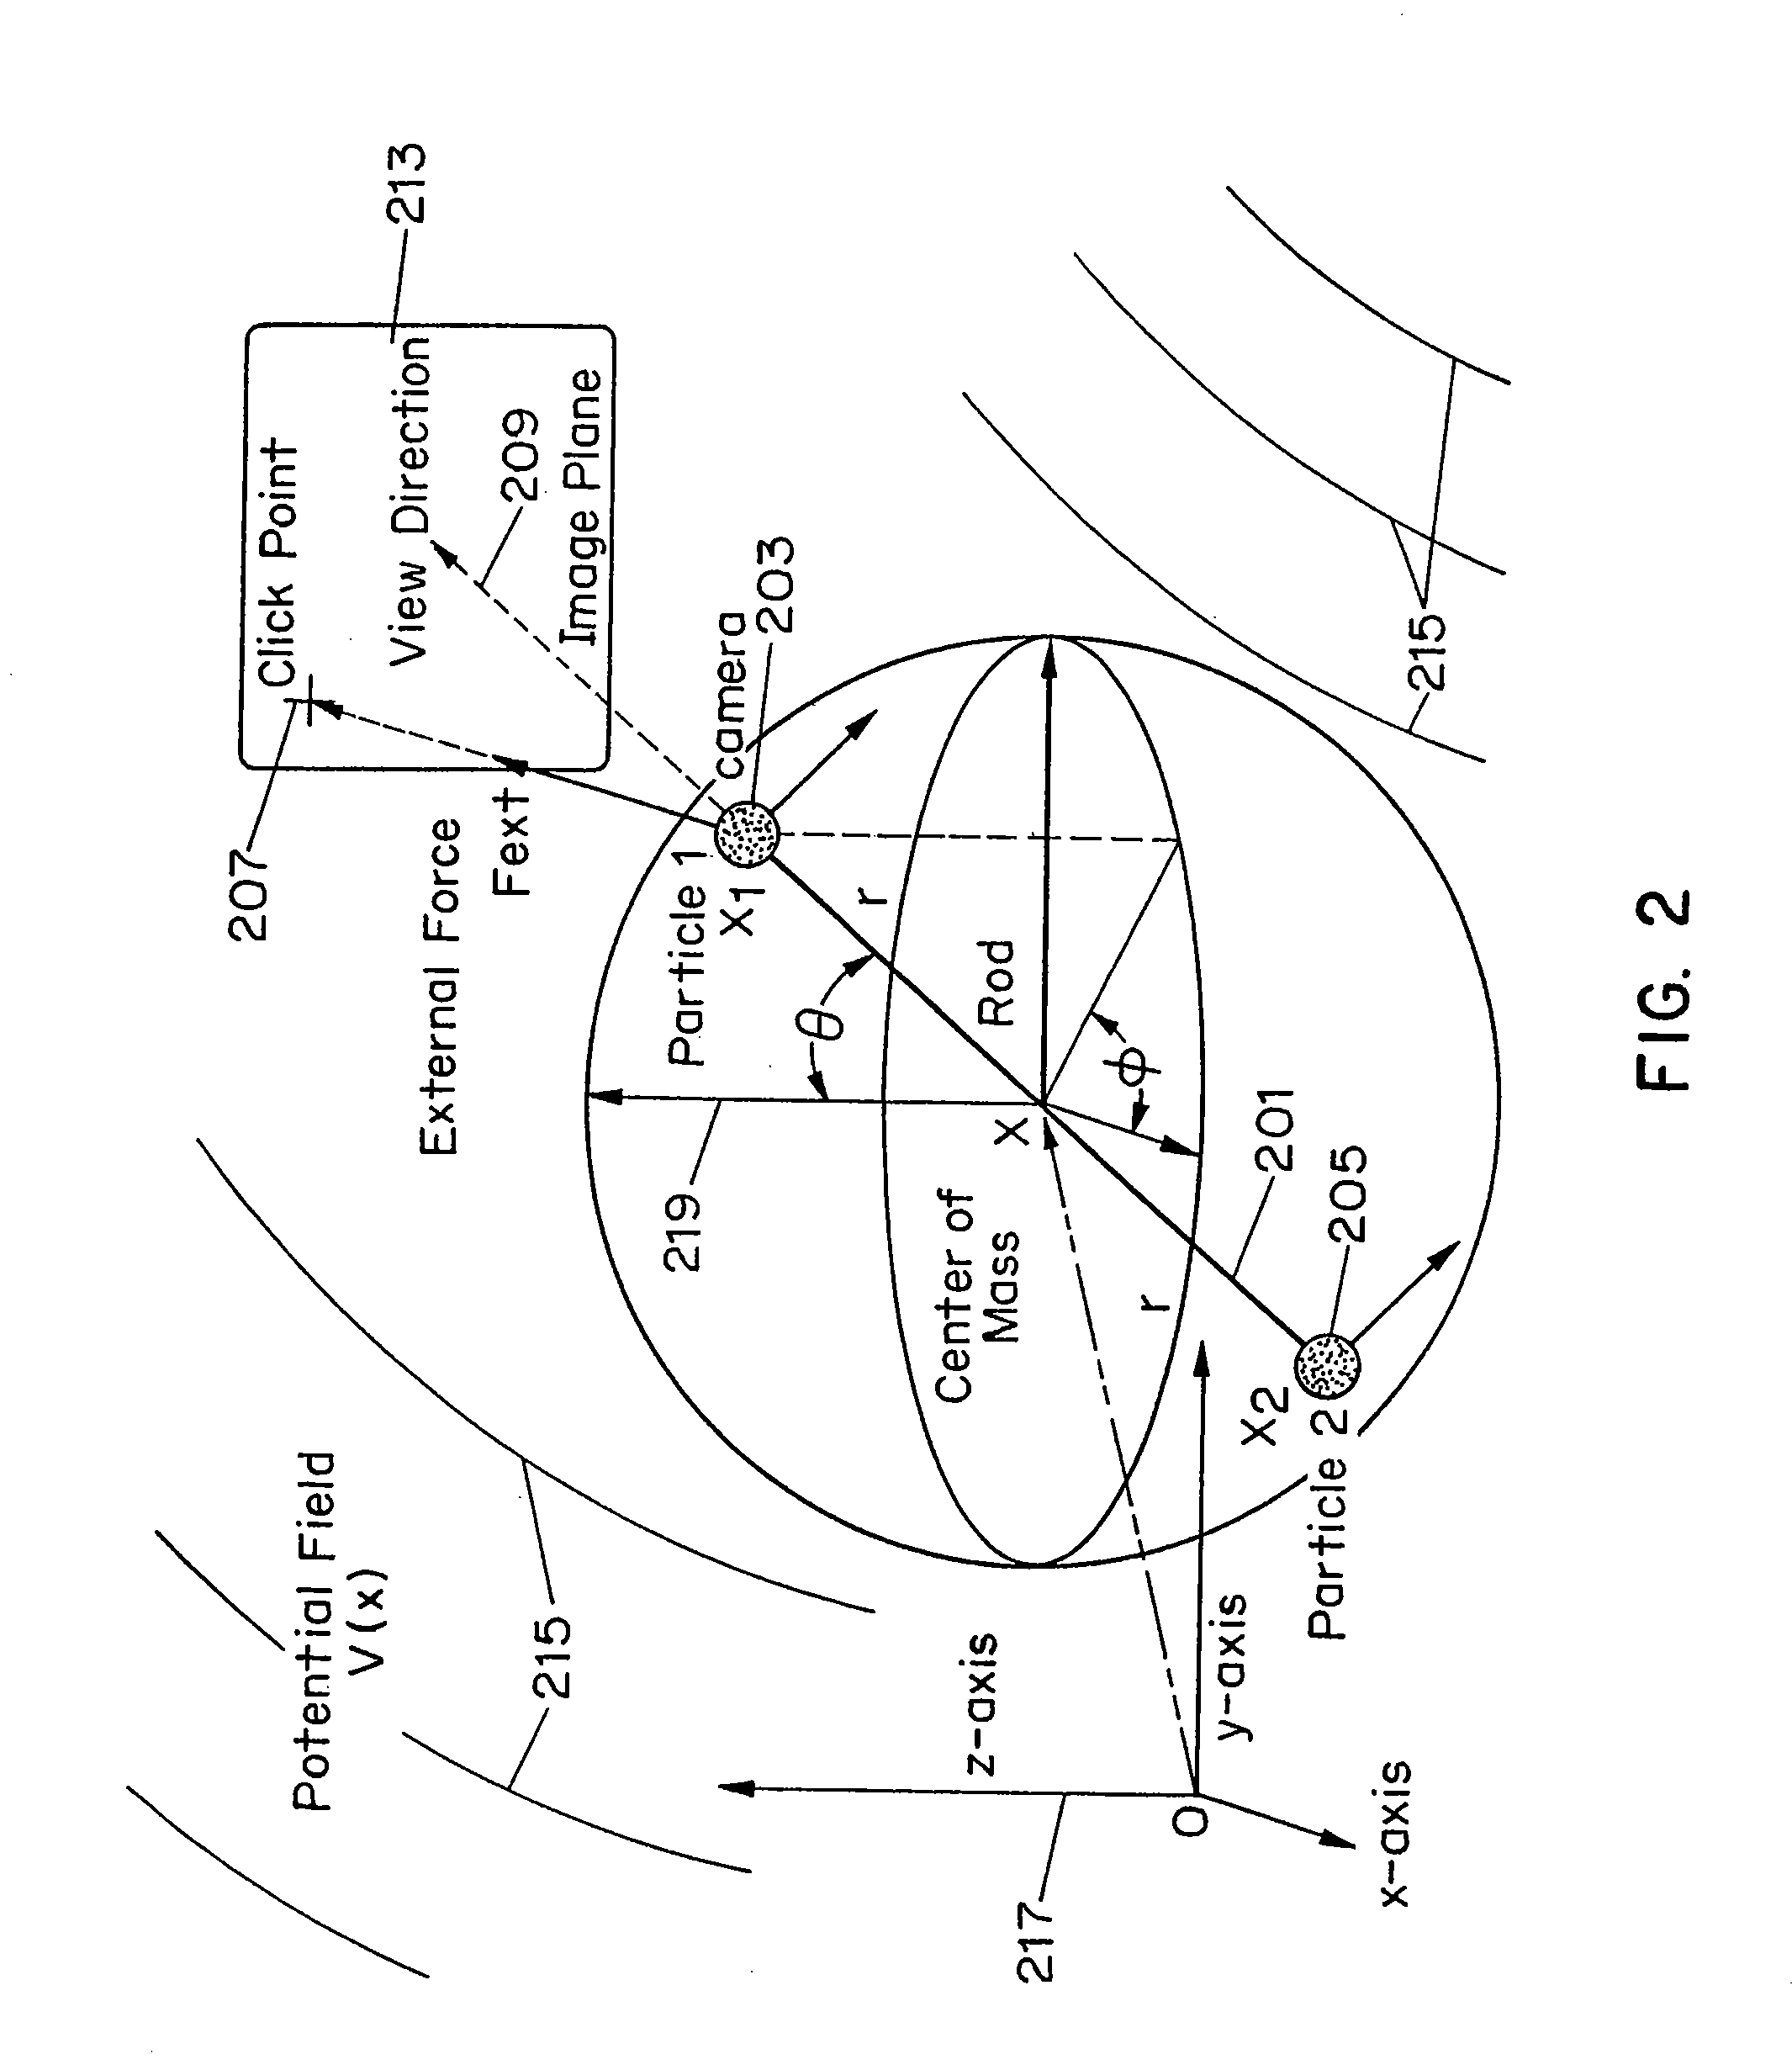 System and method for performing a three-dimensional virtual examination of objects, such as internal organs